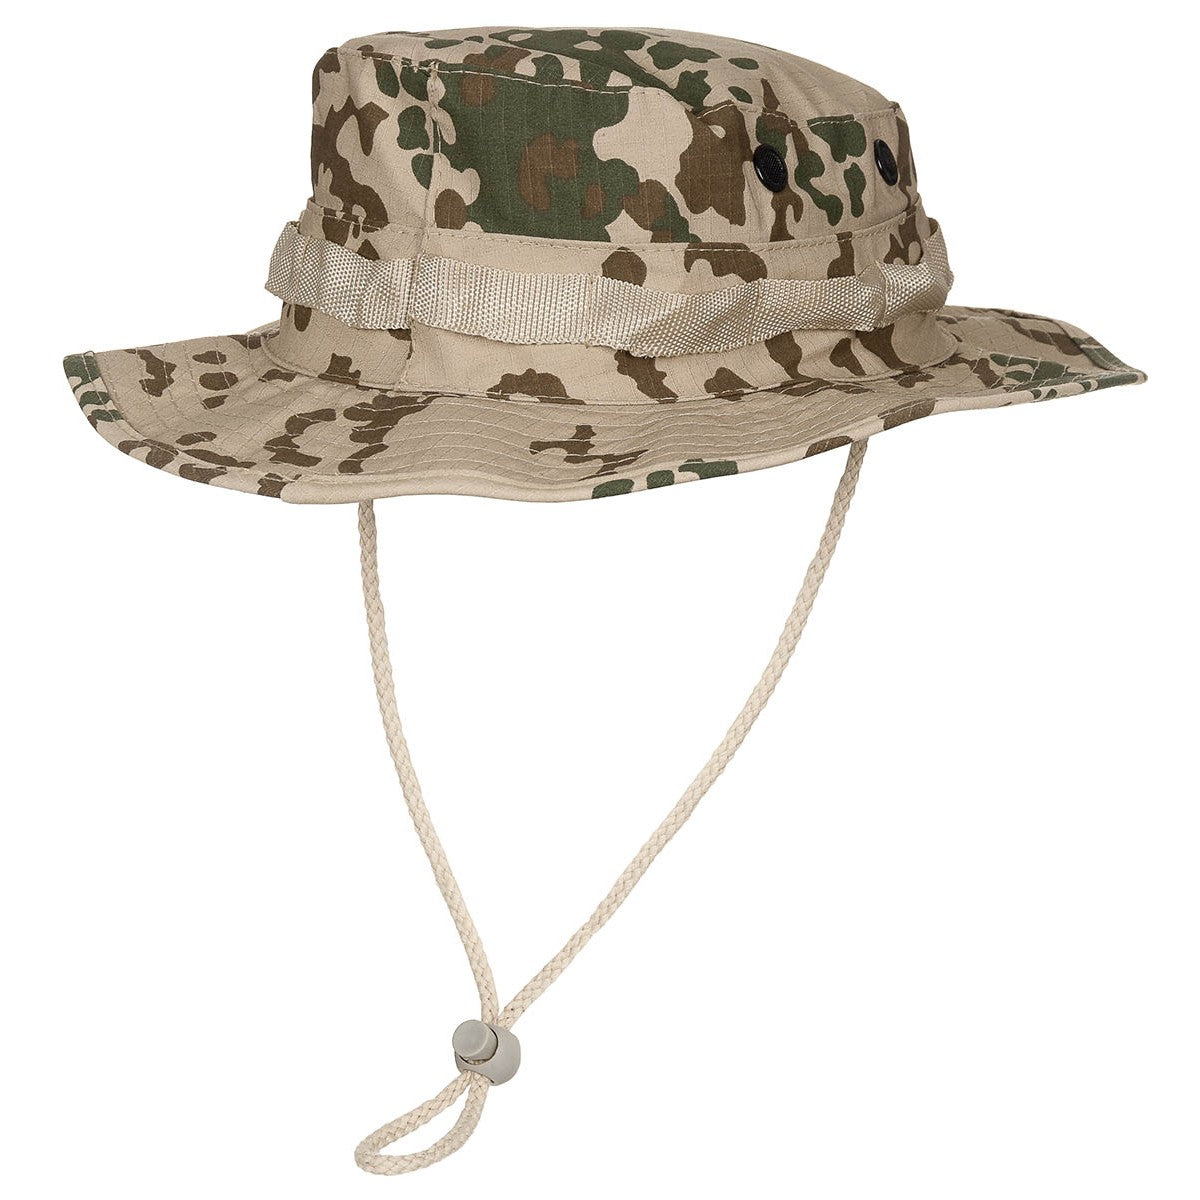 Tactical boonie - bush hat, chin strap tropical camouflage